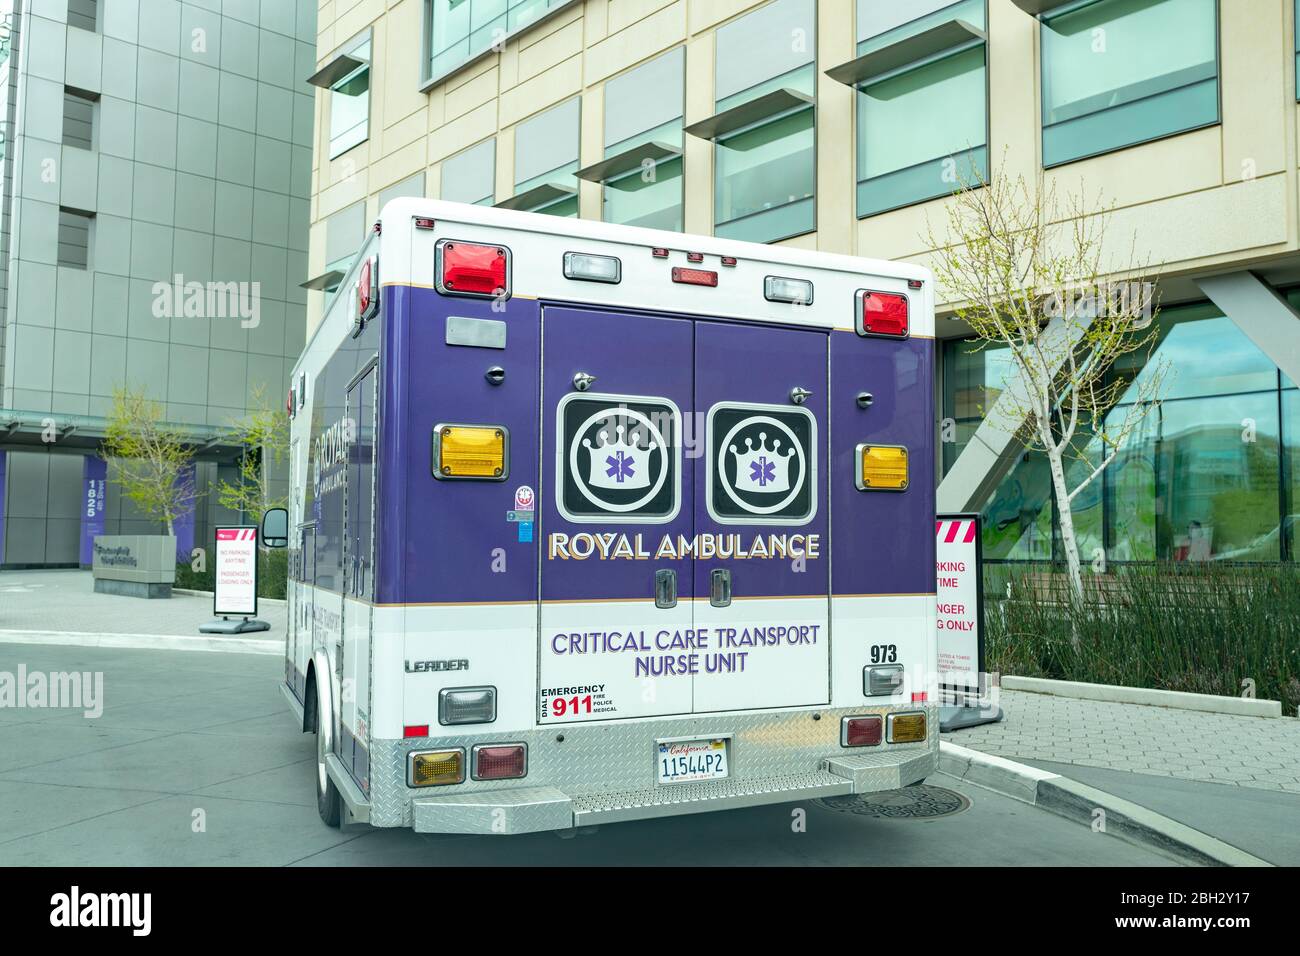 Critical care transport ambulance at UCSF medical center during outbreak of COVID-19 coronavirus, San Francisco, California, March 30, 2020. () Stock Photo